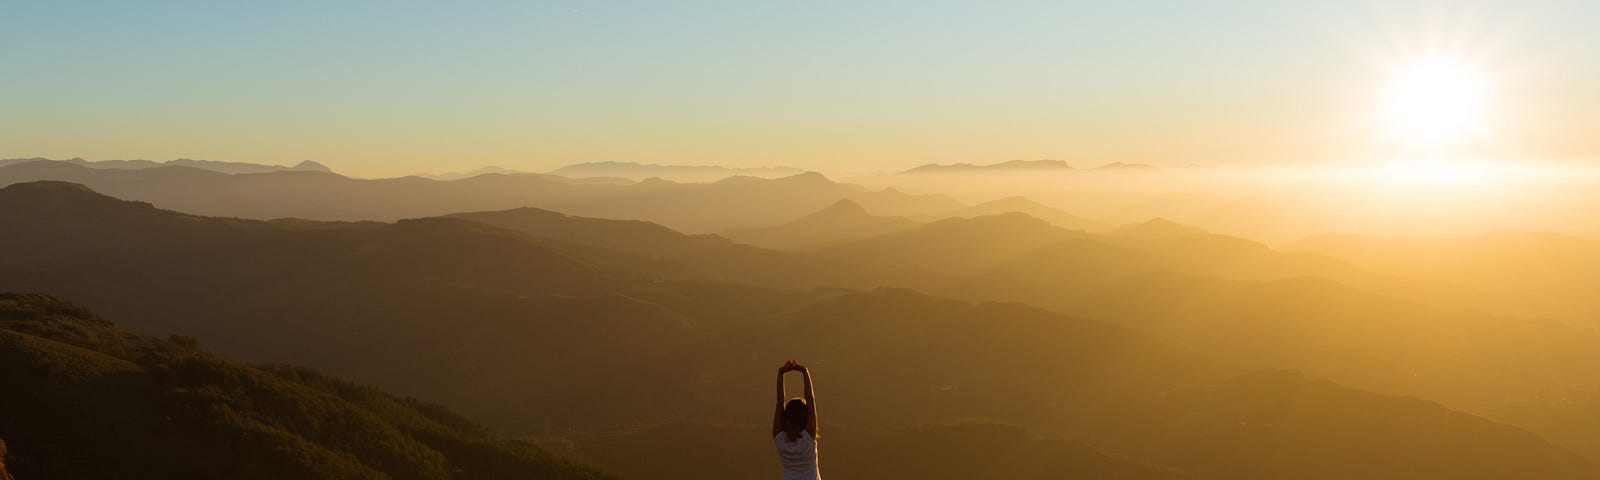 Woman doing yoga tree pose on mountaintop with sunrise